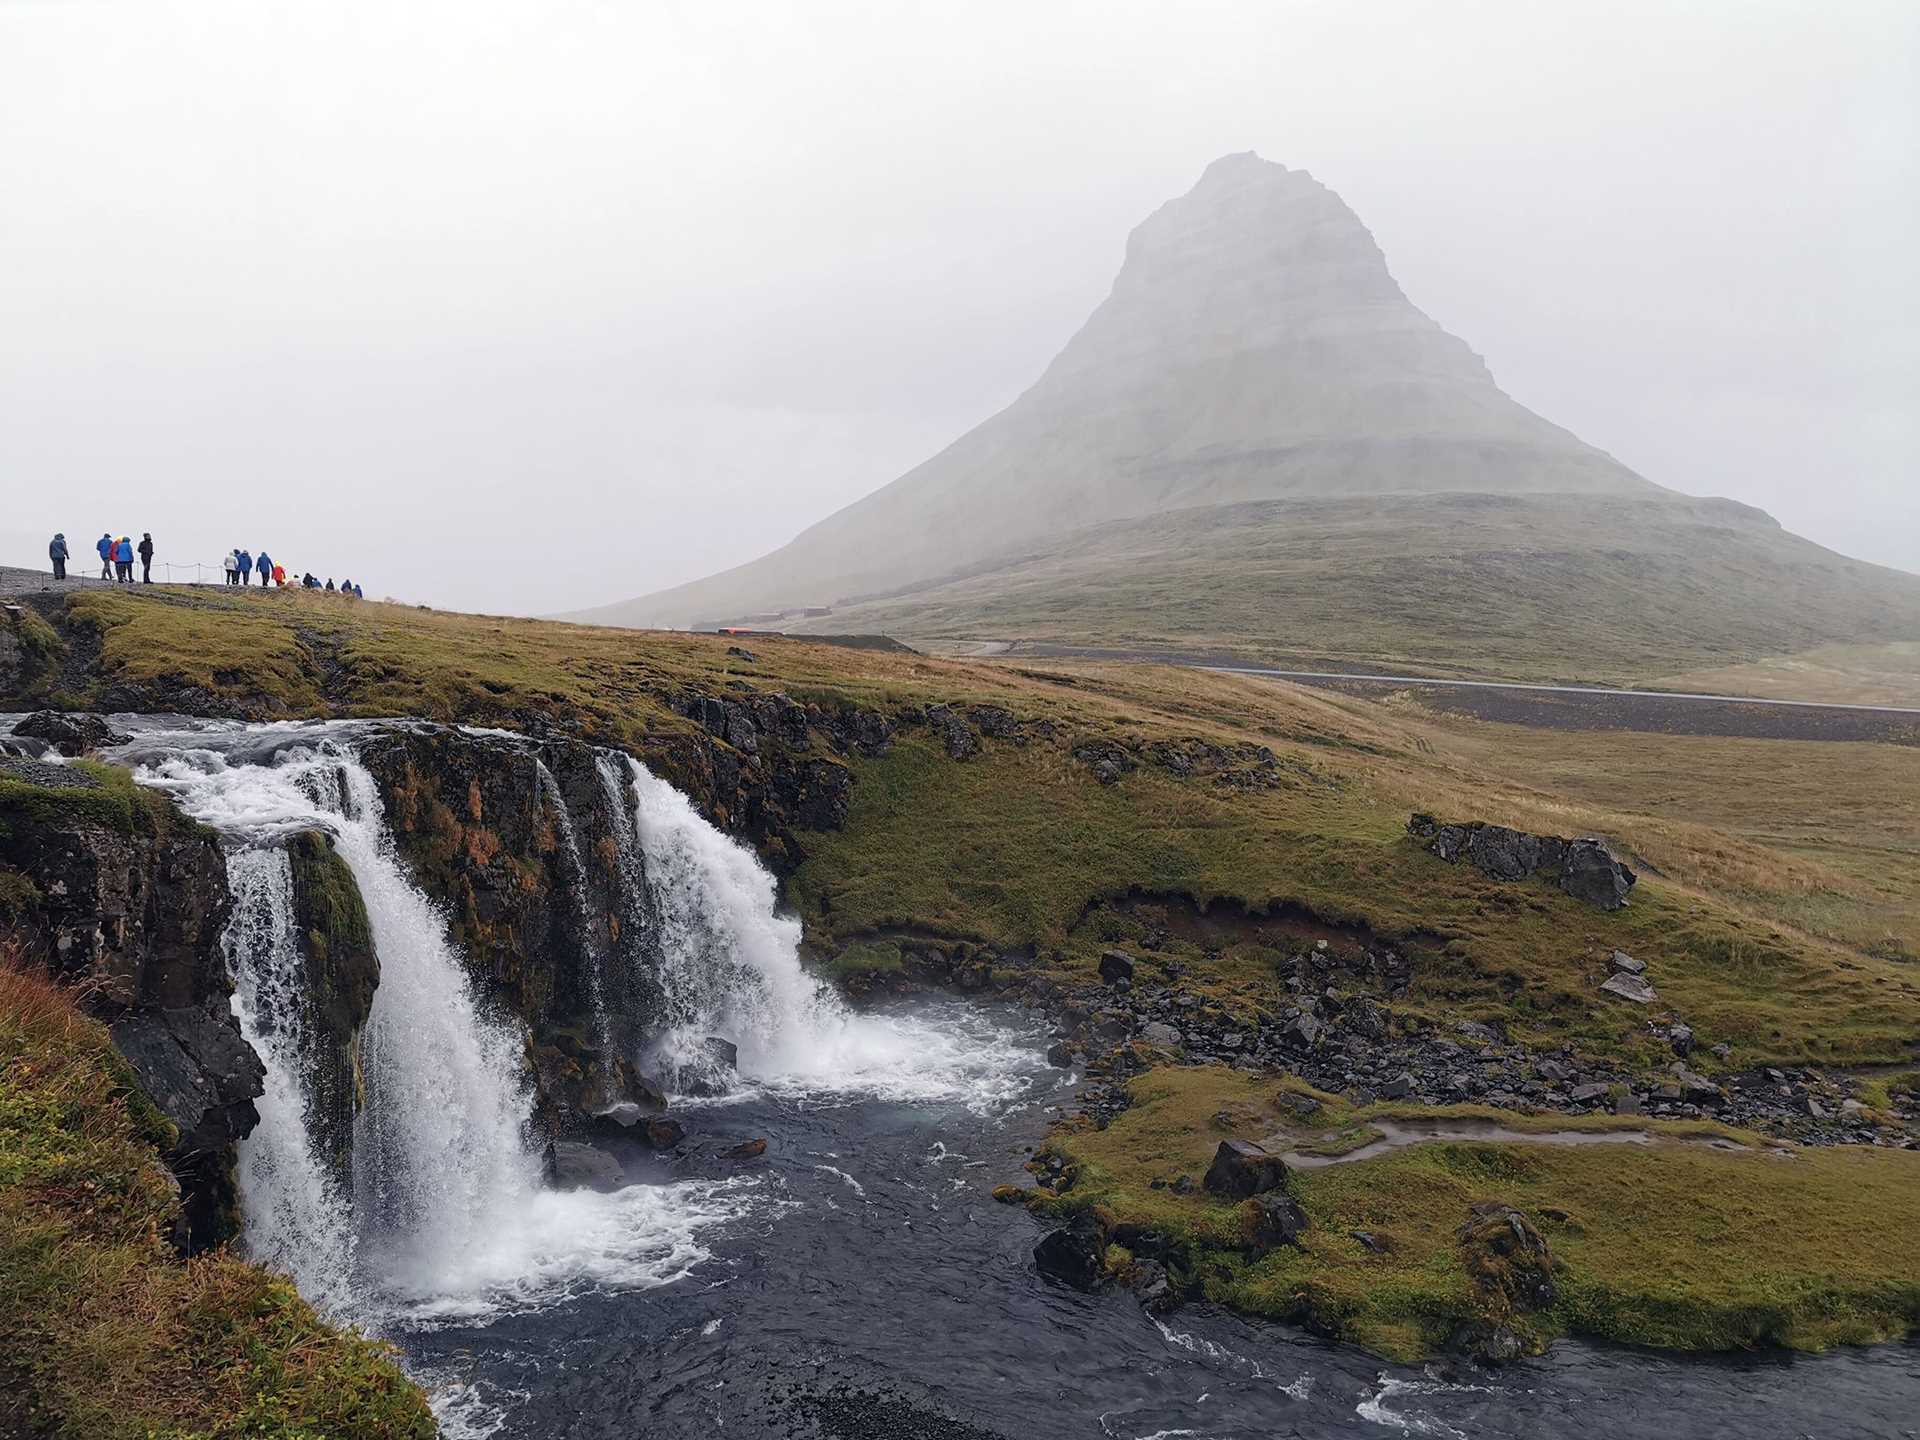 a waterfall in the foreground, with Kirkjufell mountain in the background